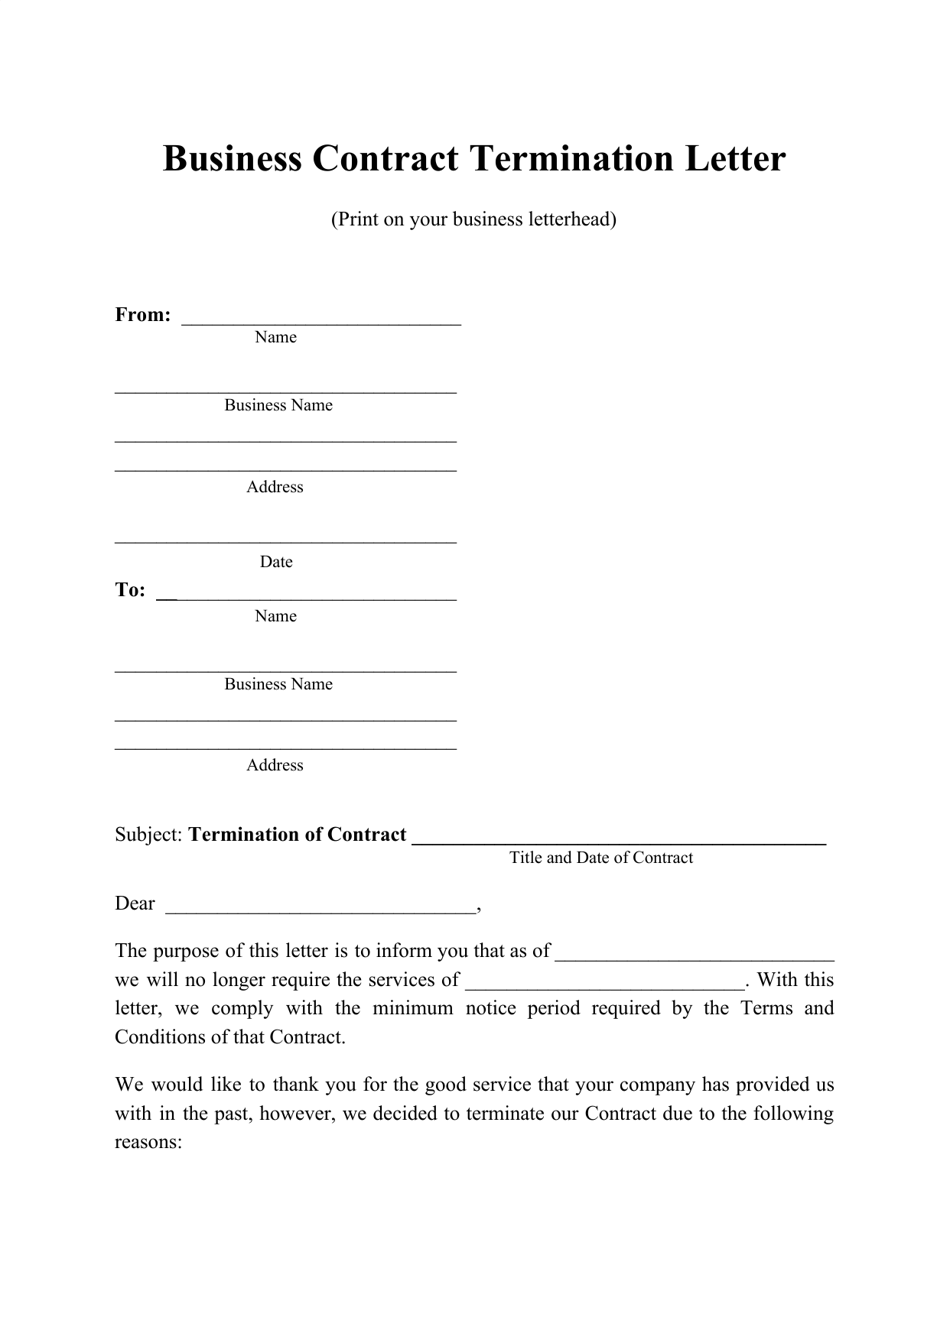 Business Contract Termination Letter Template, Page 1